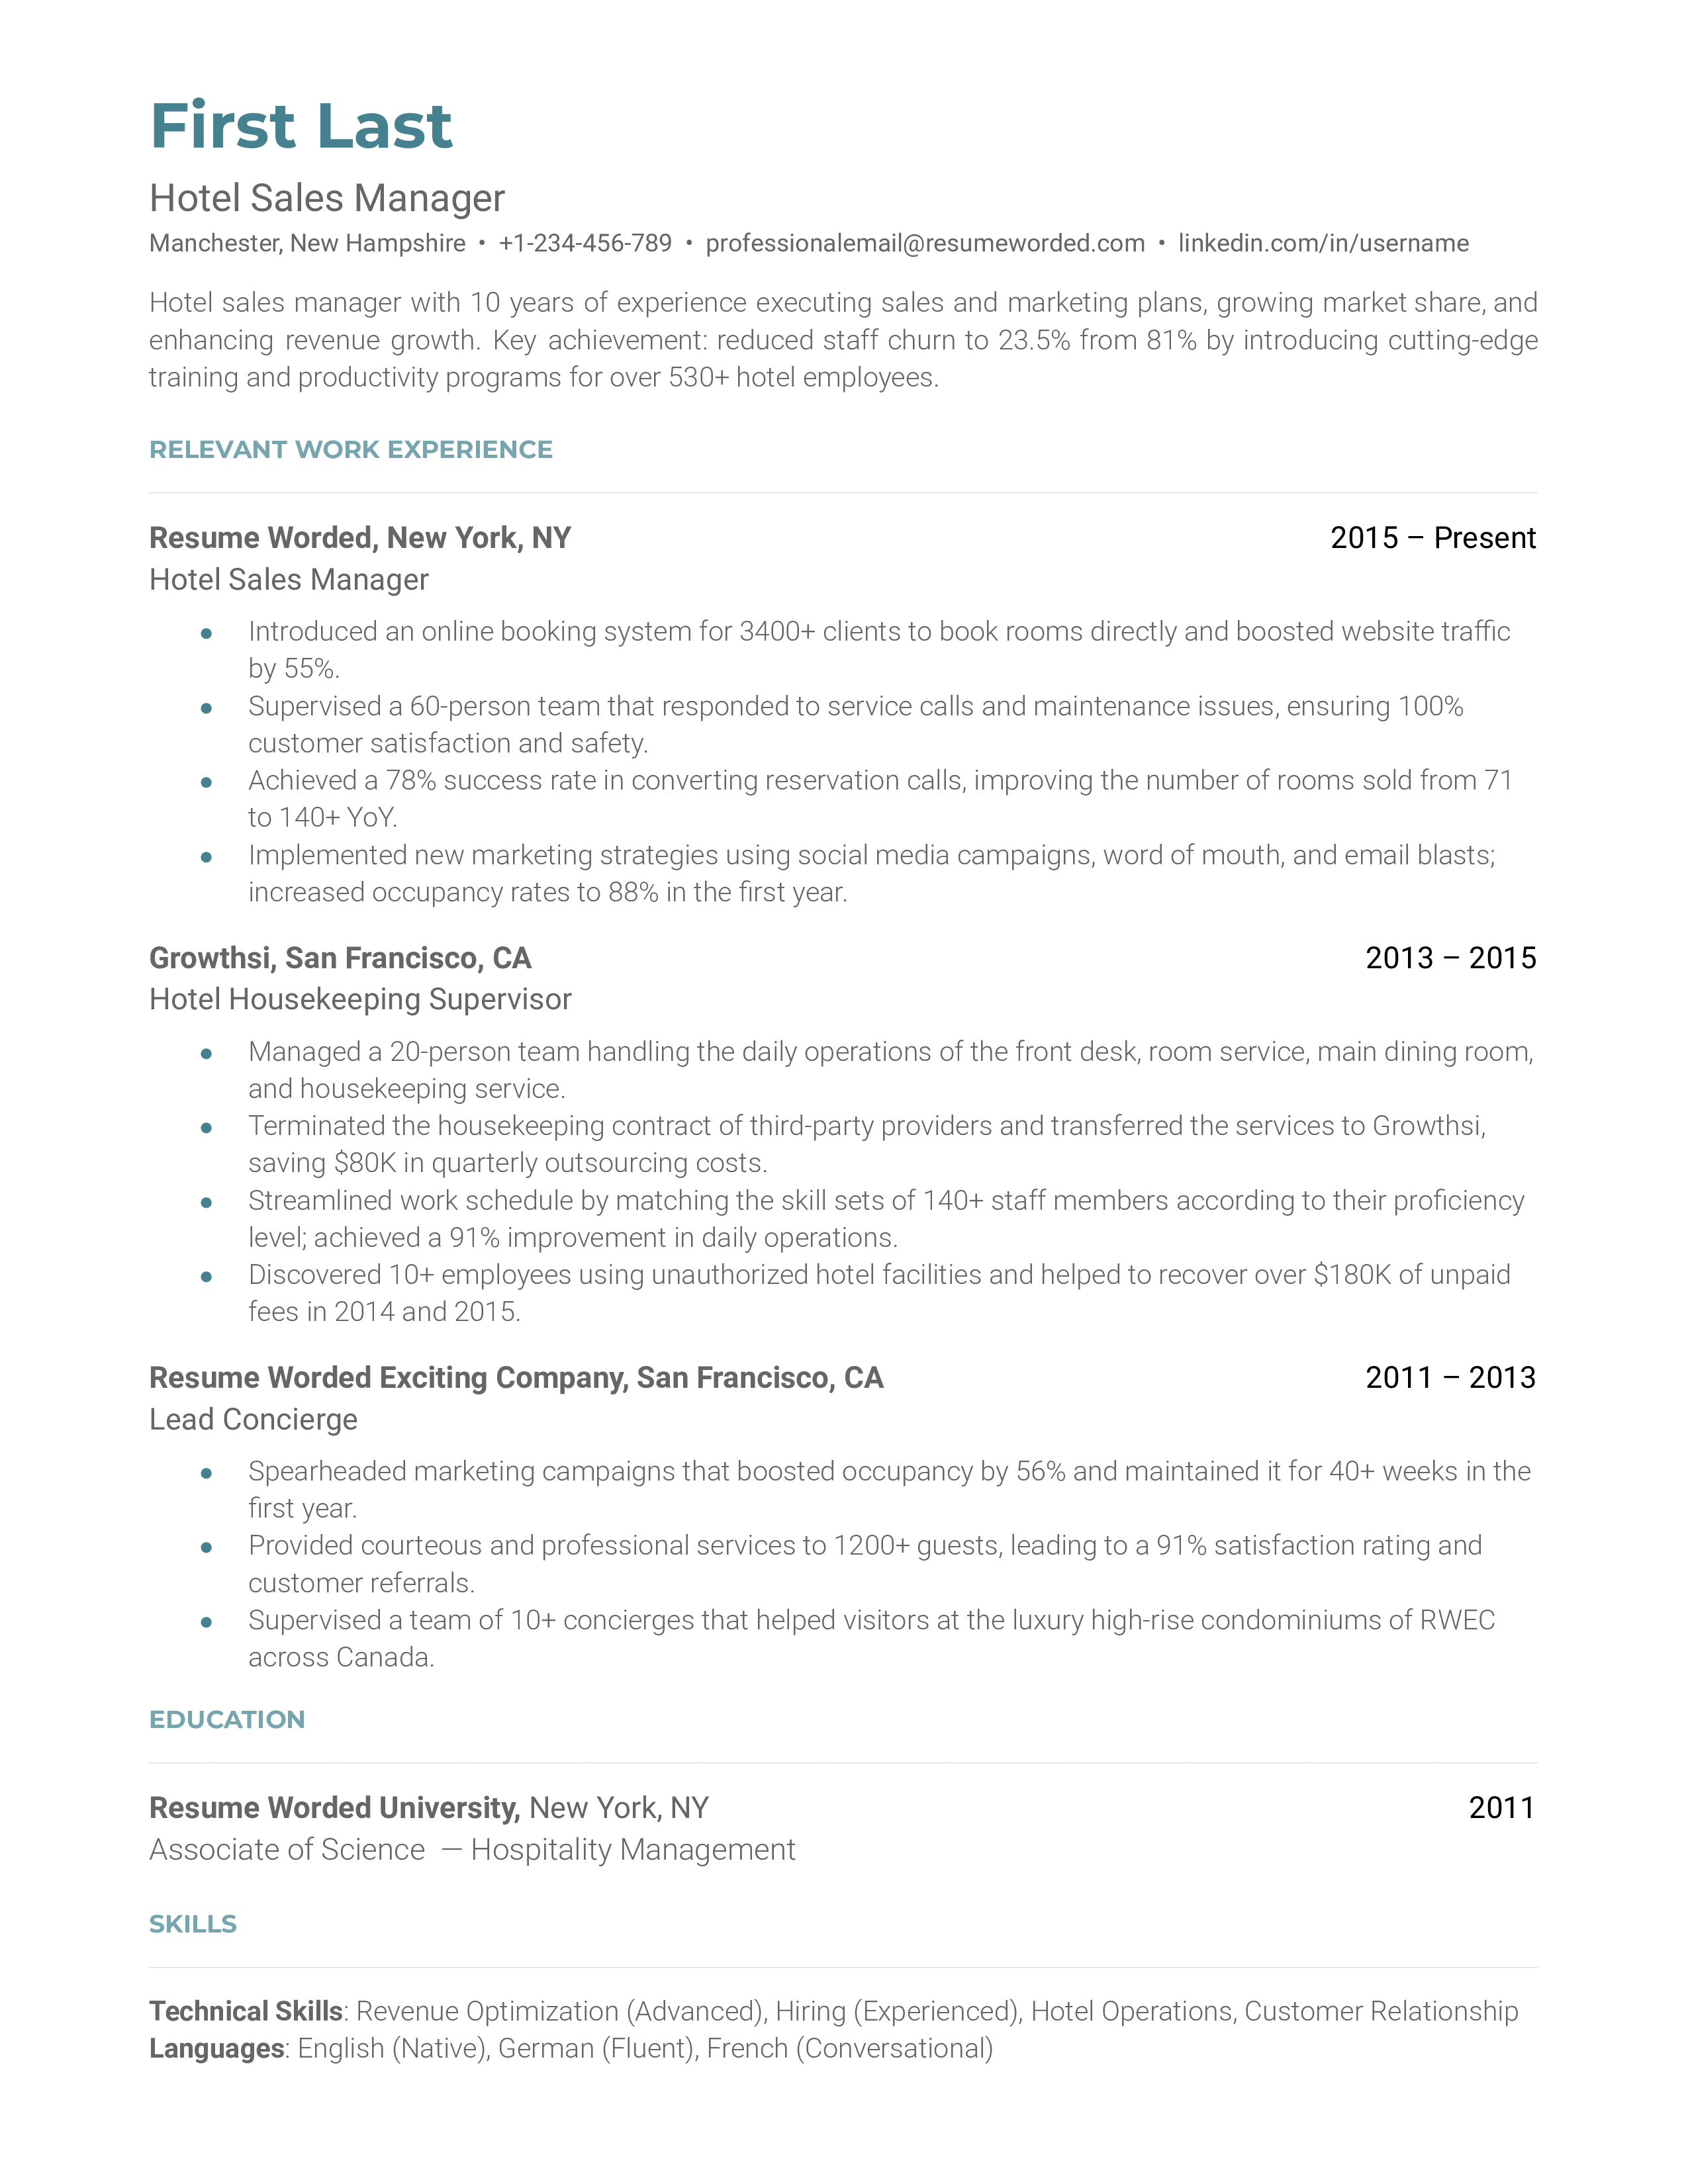 A resume for a hotel sales manager with a master's degree in business administration and prior experience as a hospitality sales manager.